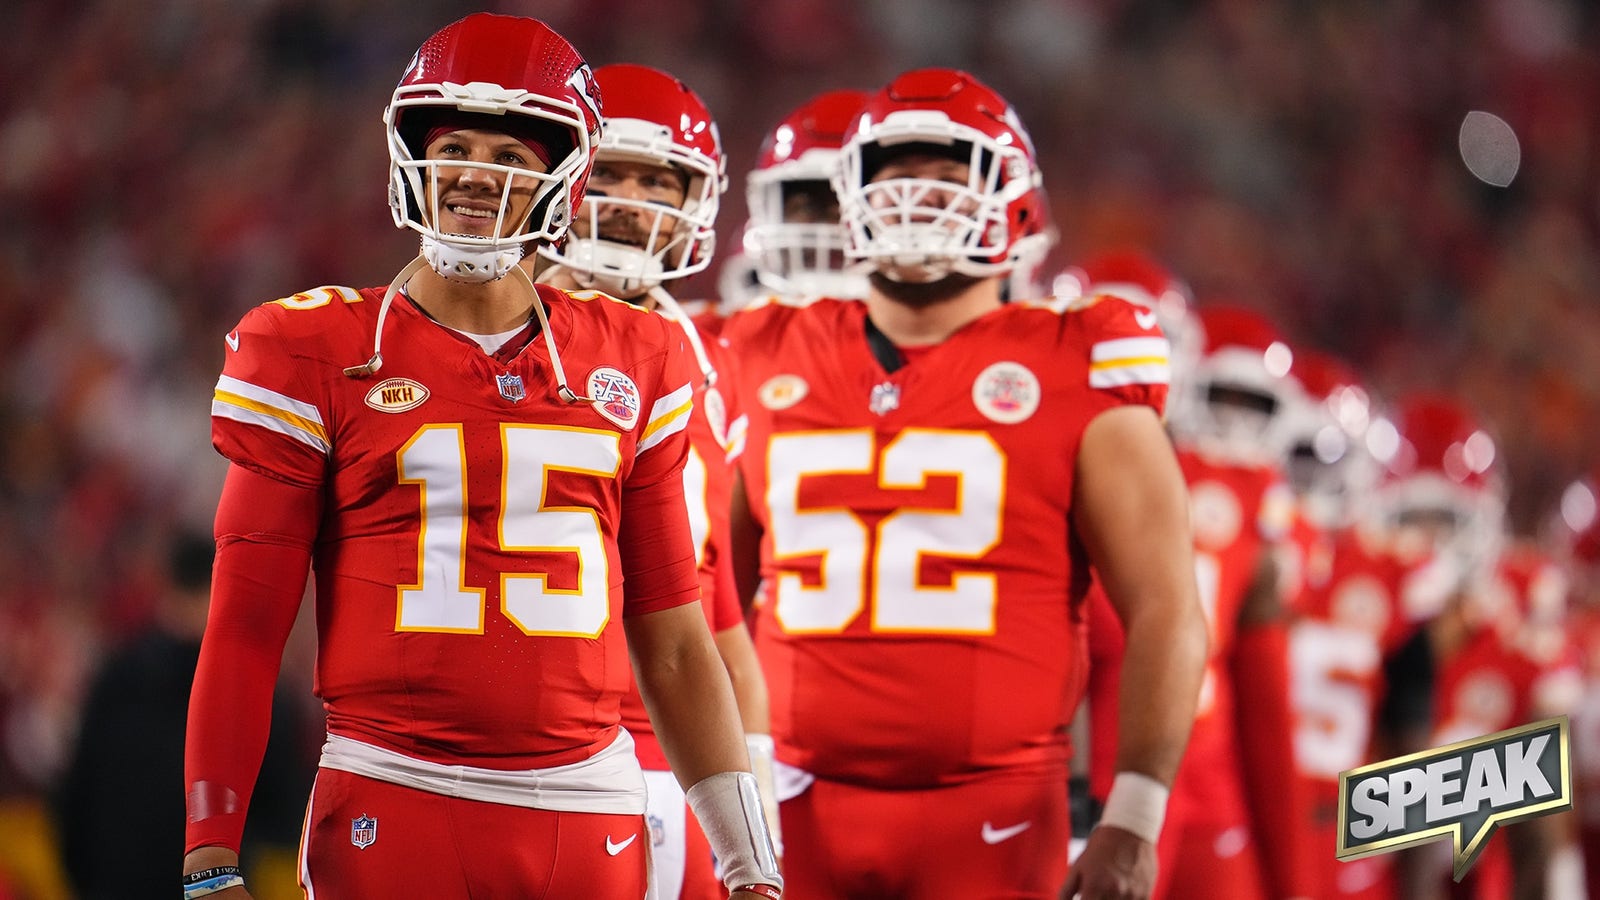 Have the Chiefs proven they’re the best team in the NFL through Week 6?